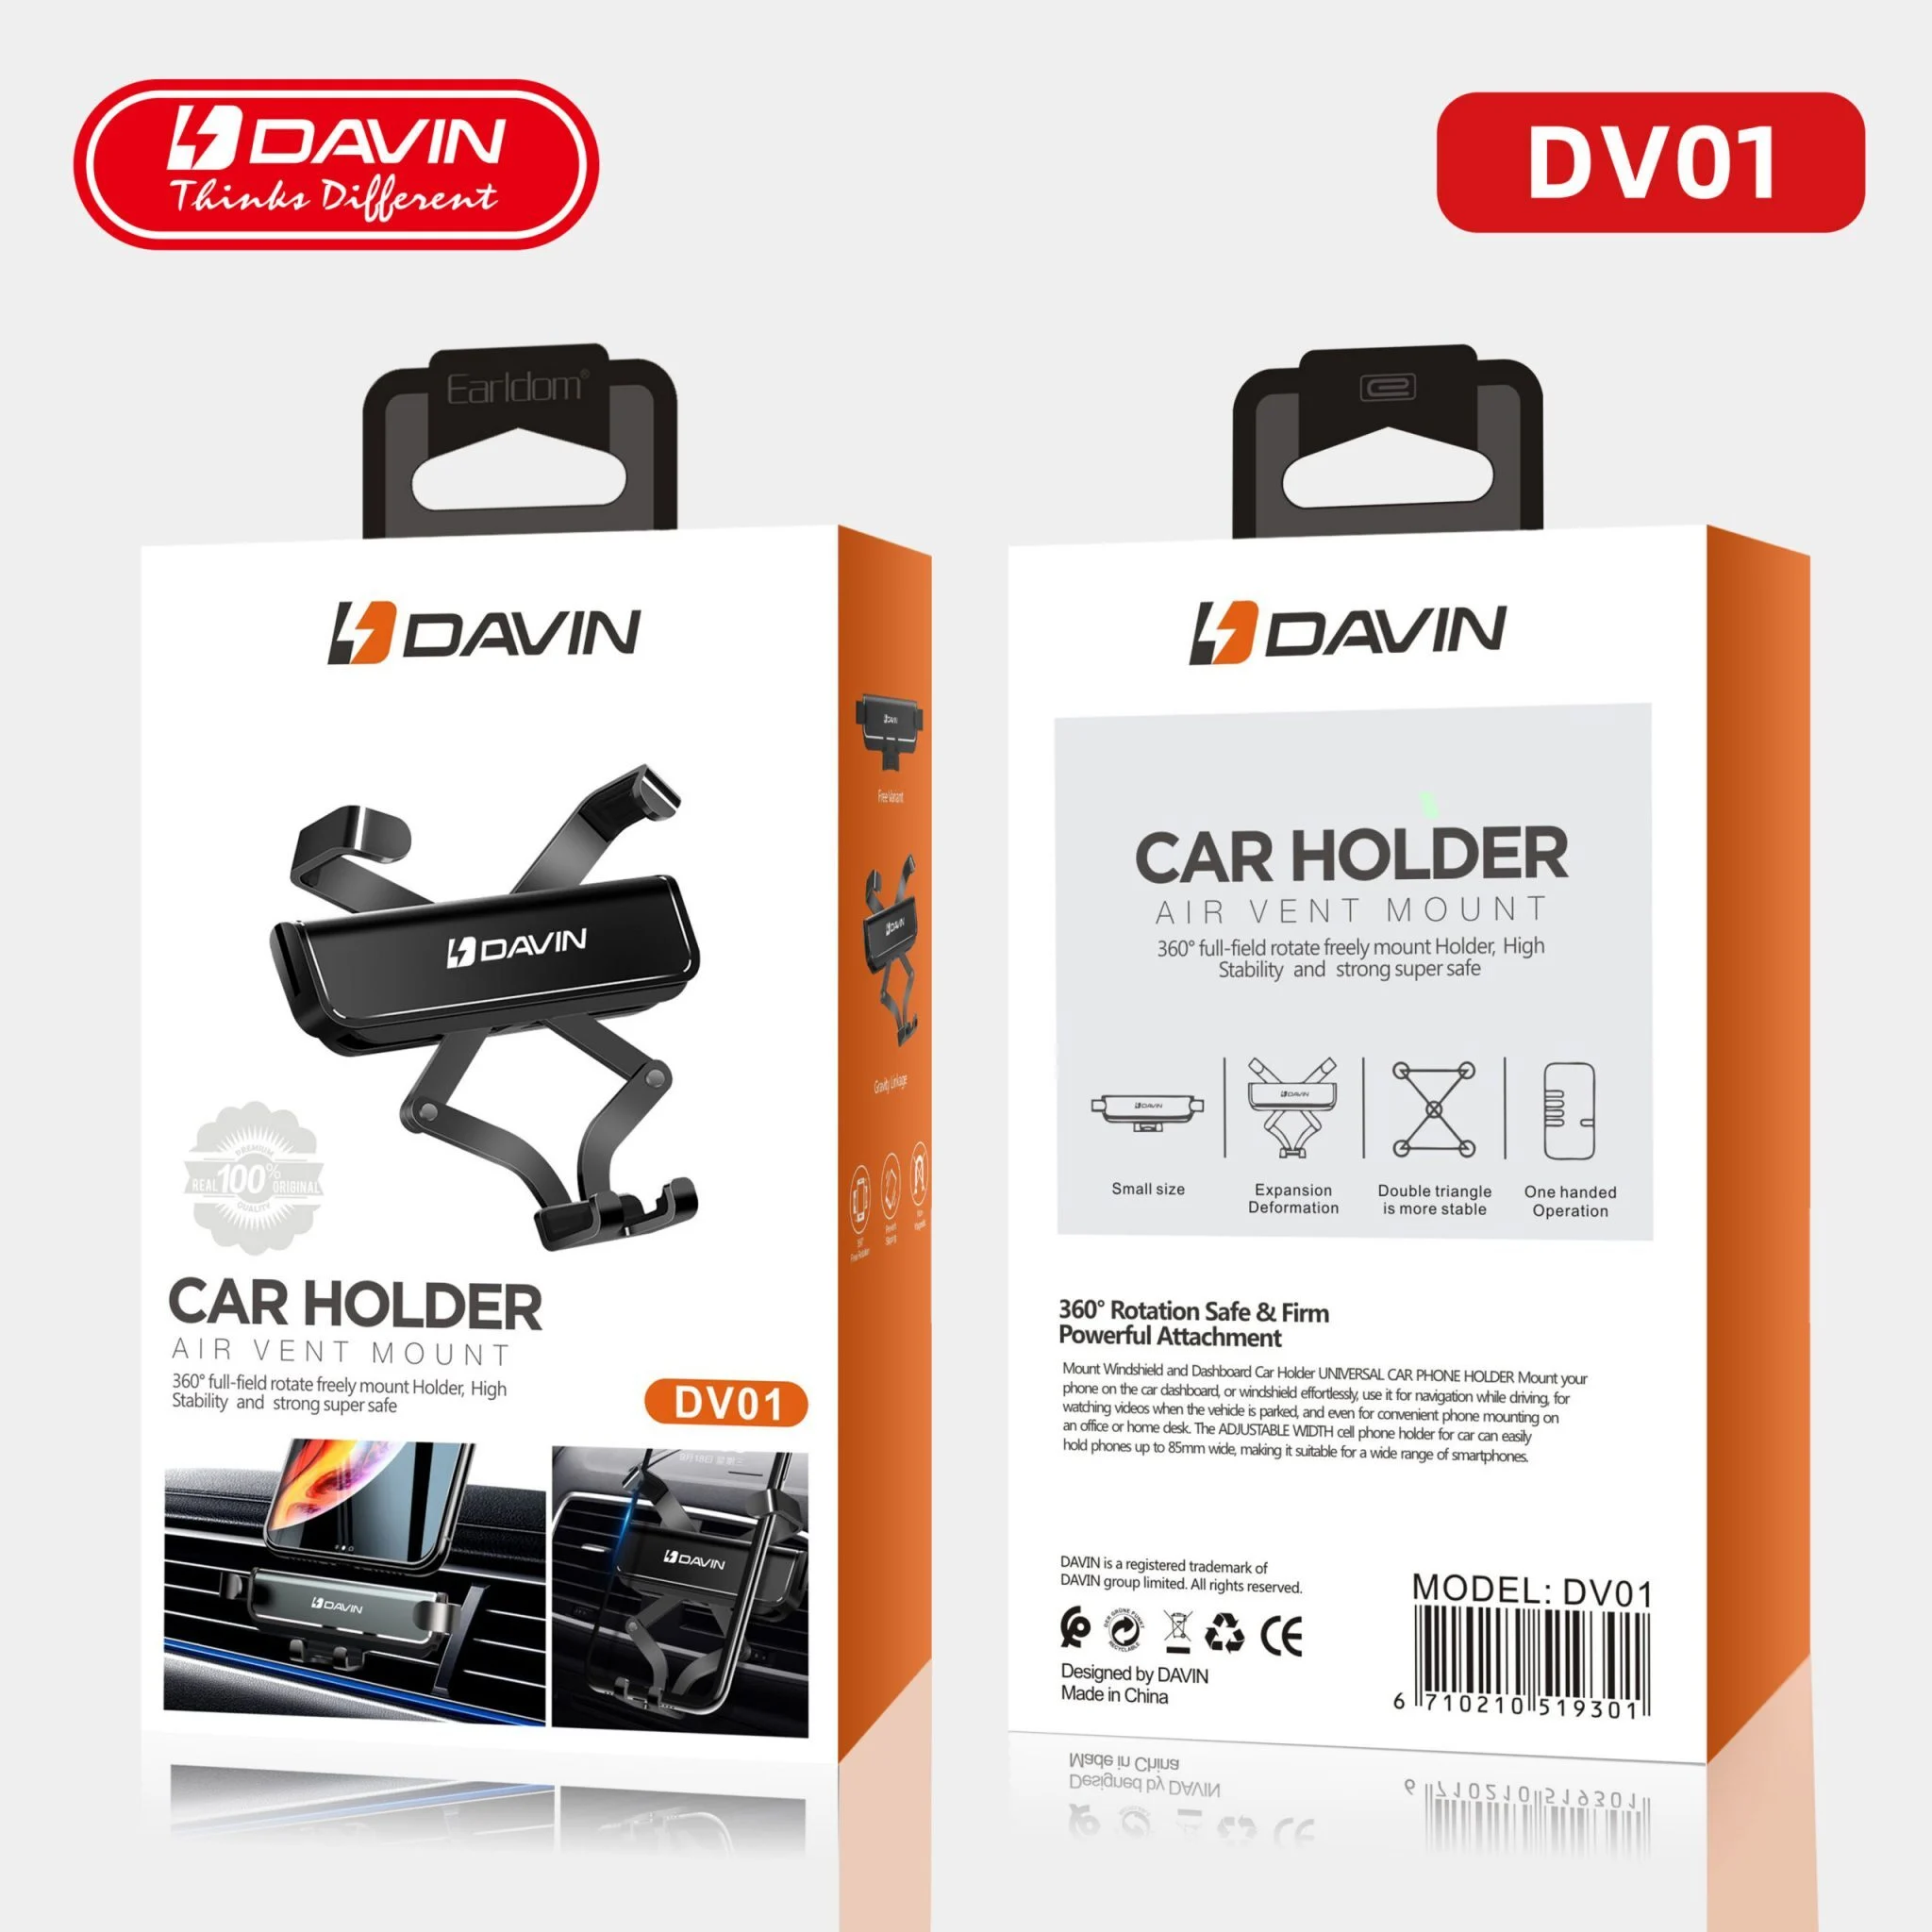 Davin Smartphone Stabilizer and Holder, Durable and High Quality Mobile Tripod and Stabilizer, Black DV01